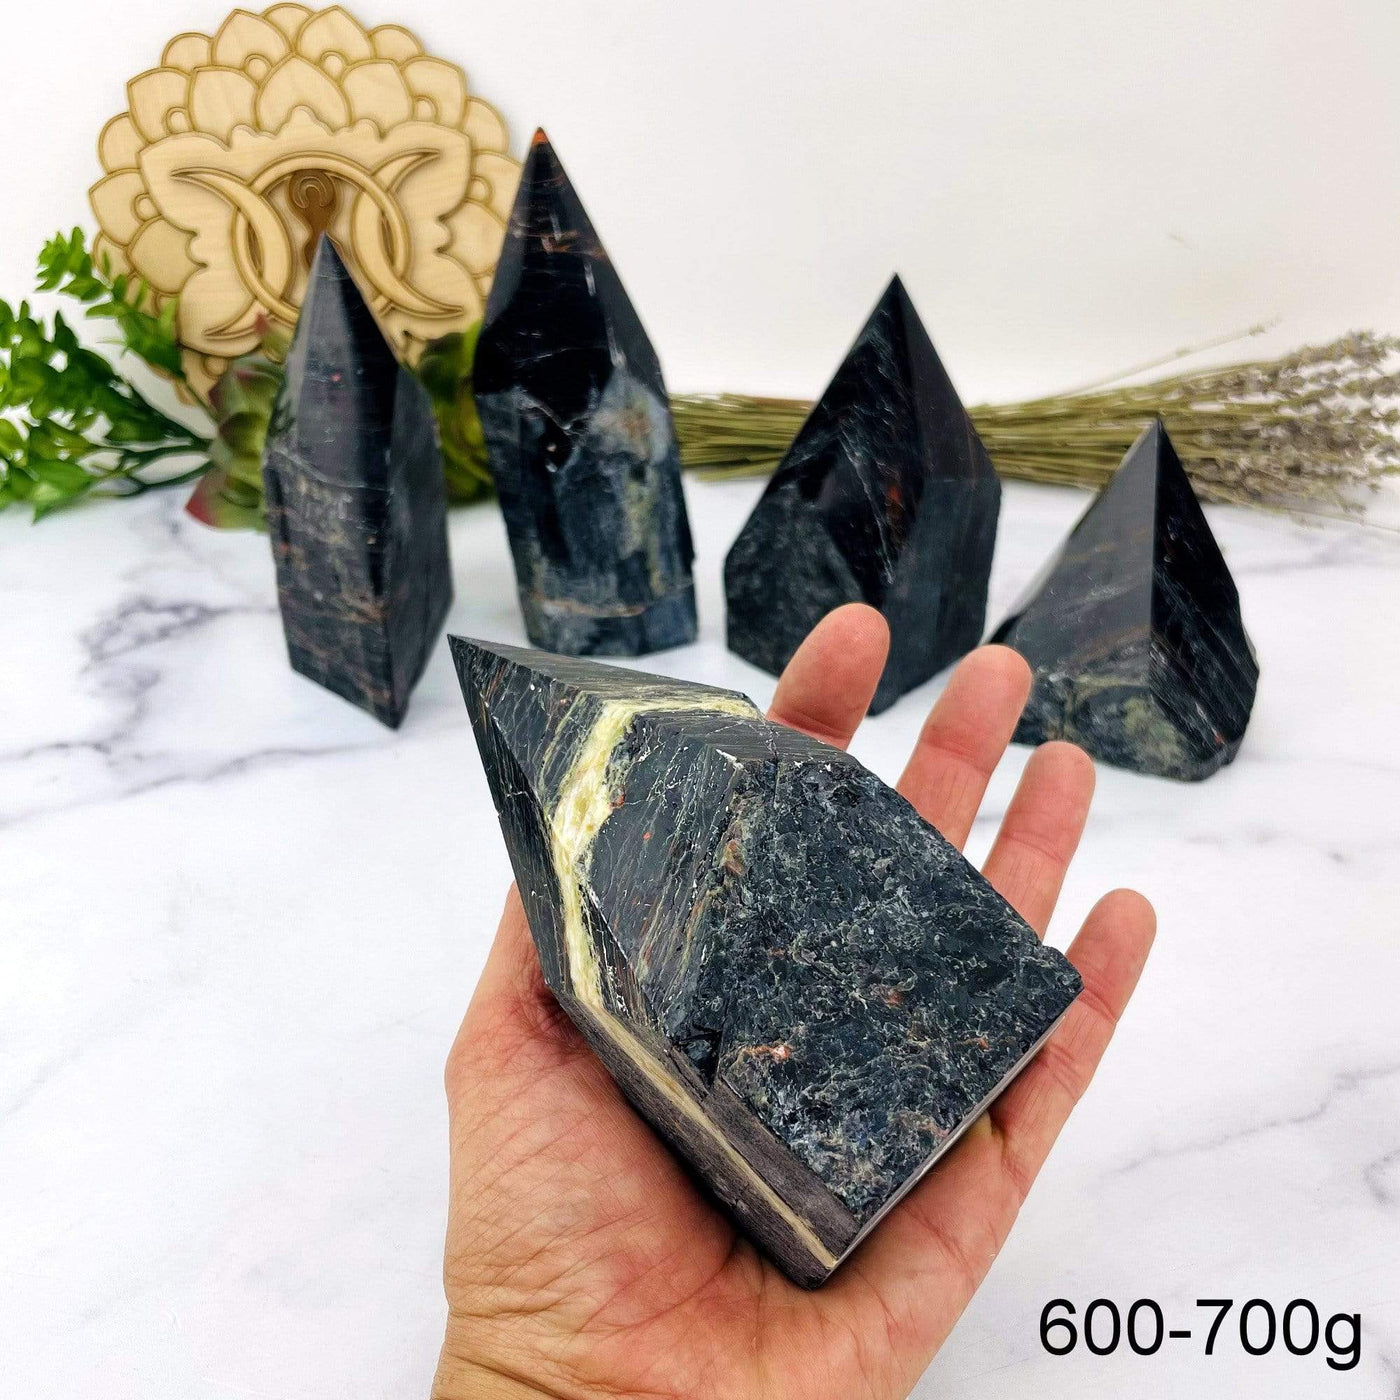 Black Tourmaline with Red Hematite Veins Semi Polished Points weight in 600-700g in hand for size reference